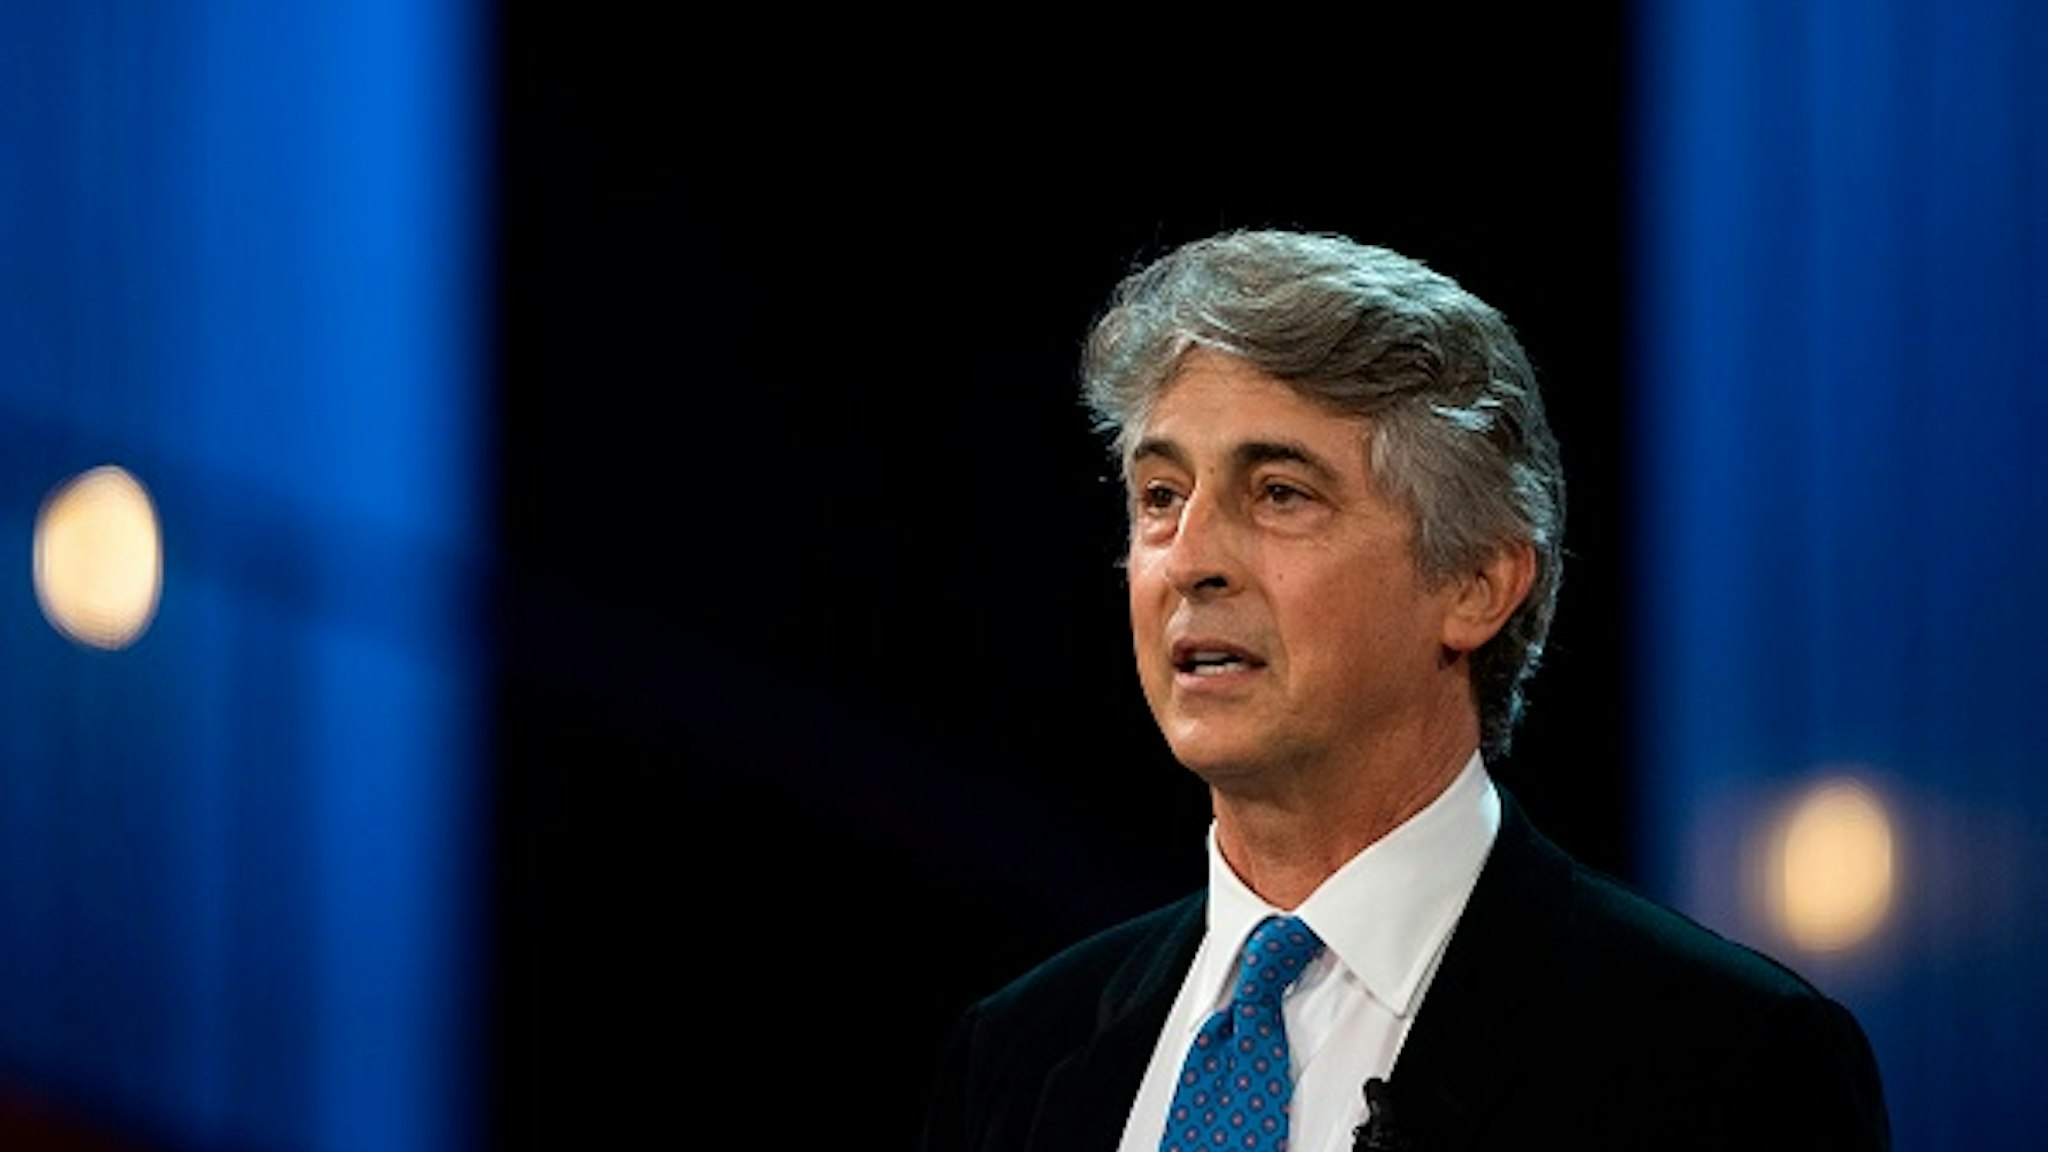 President of the official jury, US director and writer Alexander Payne, takes part in the opening ceremony of the 66th San Sebastian Film Festival, in the northern Spanish Basque city of San Sebastian on September 21, 2018.